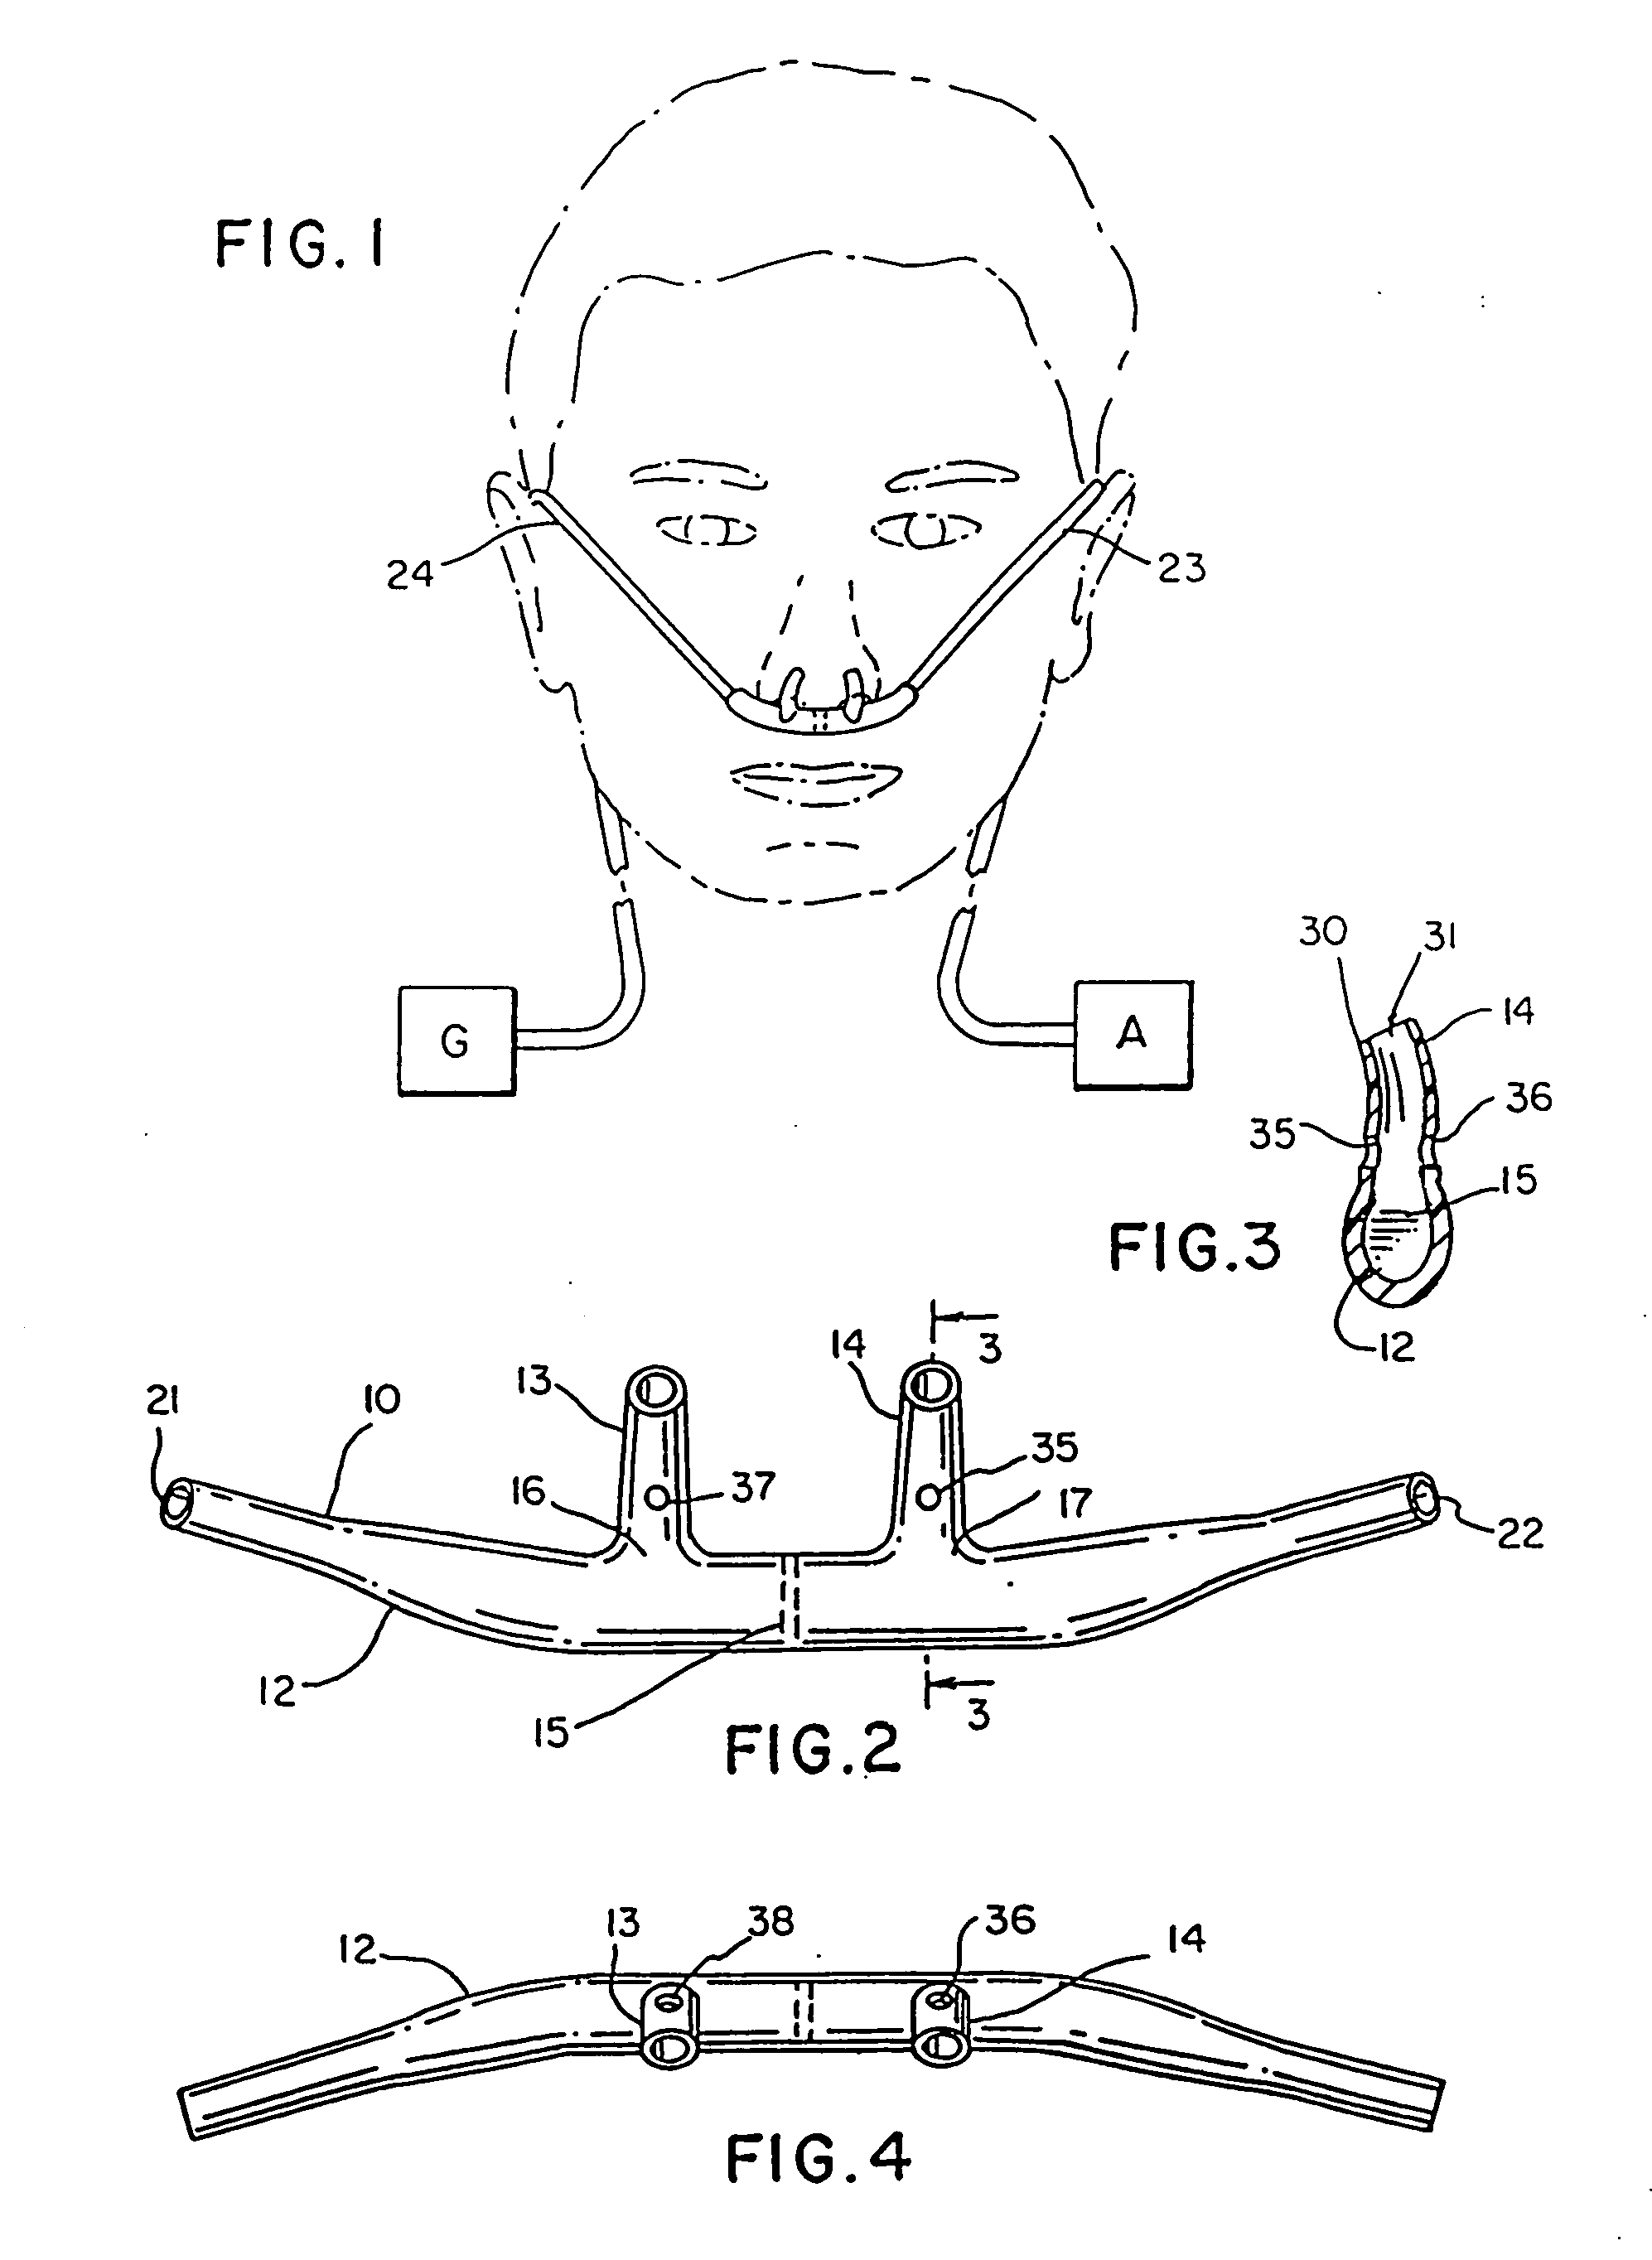 Nasal cannula for acquiring breathing information